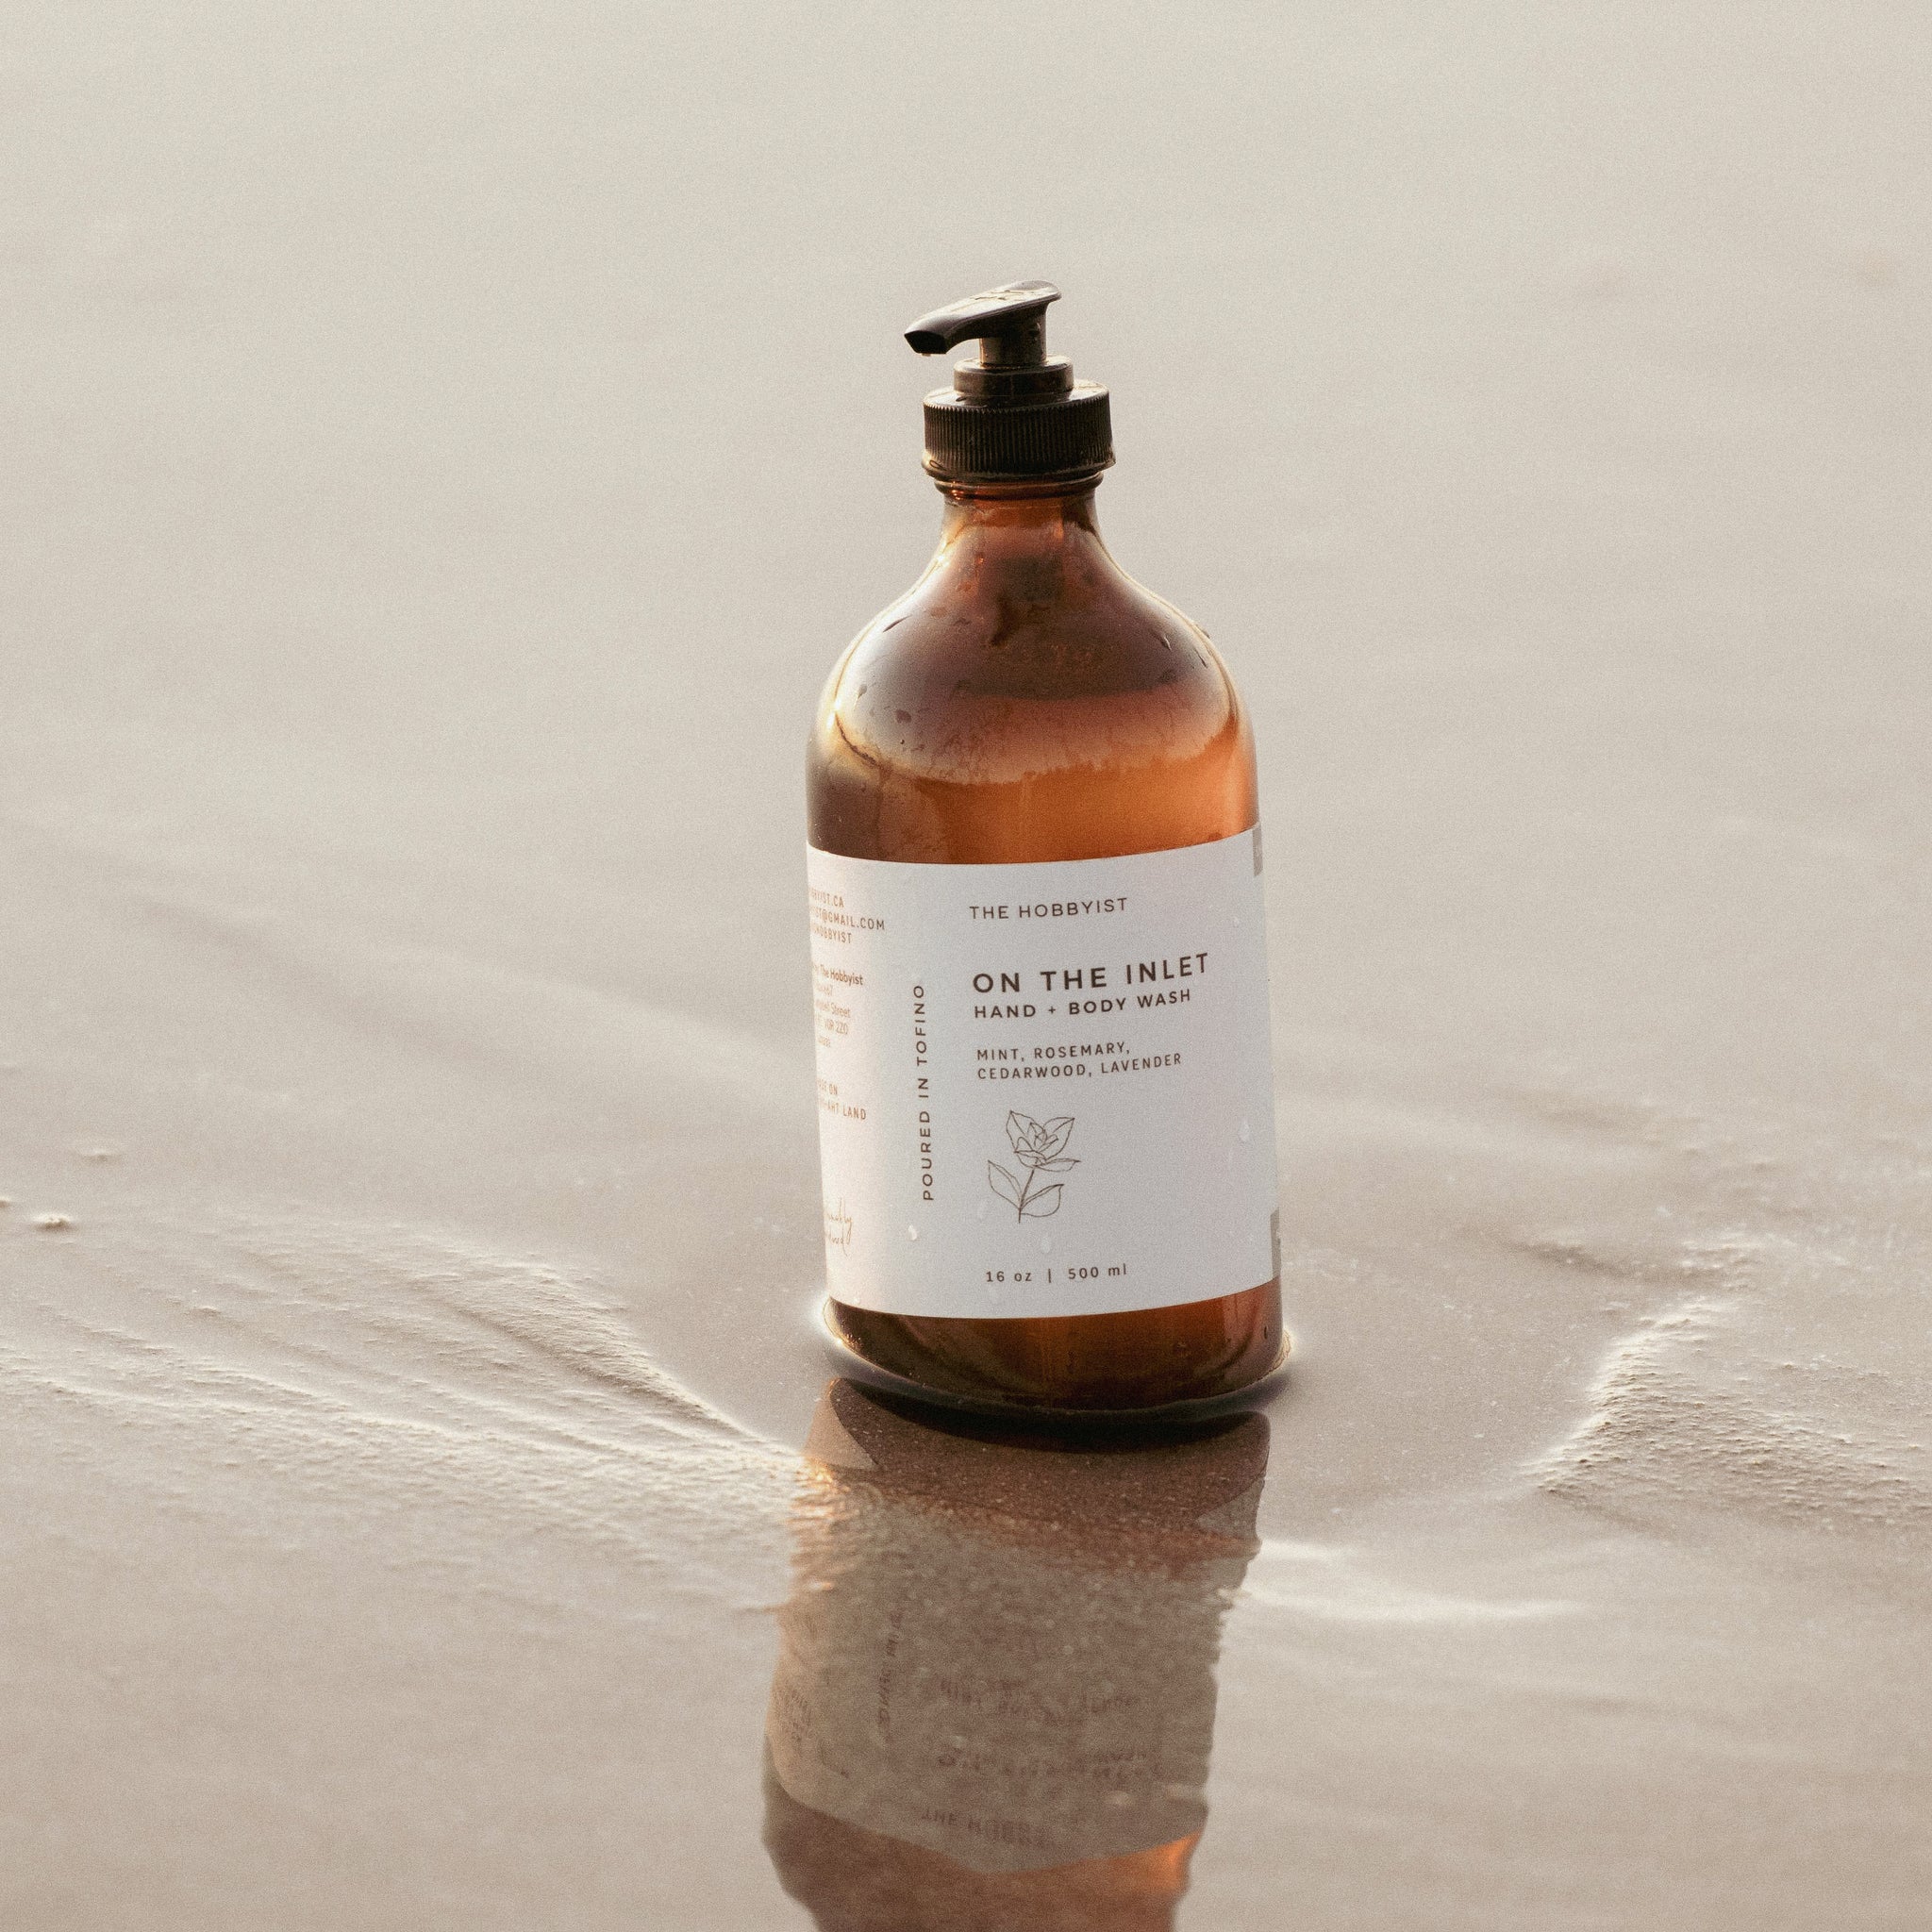 On the Inlet | Hand + Body Wash